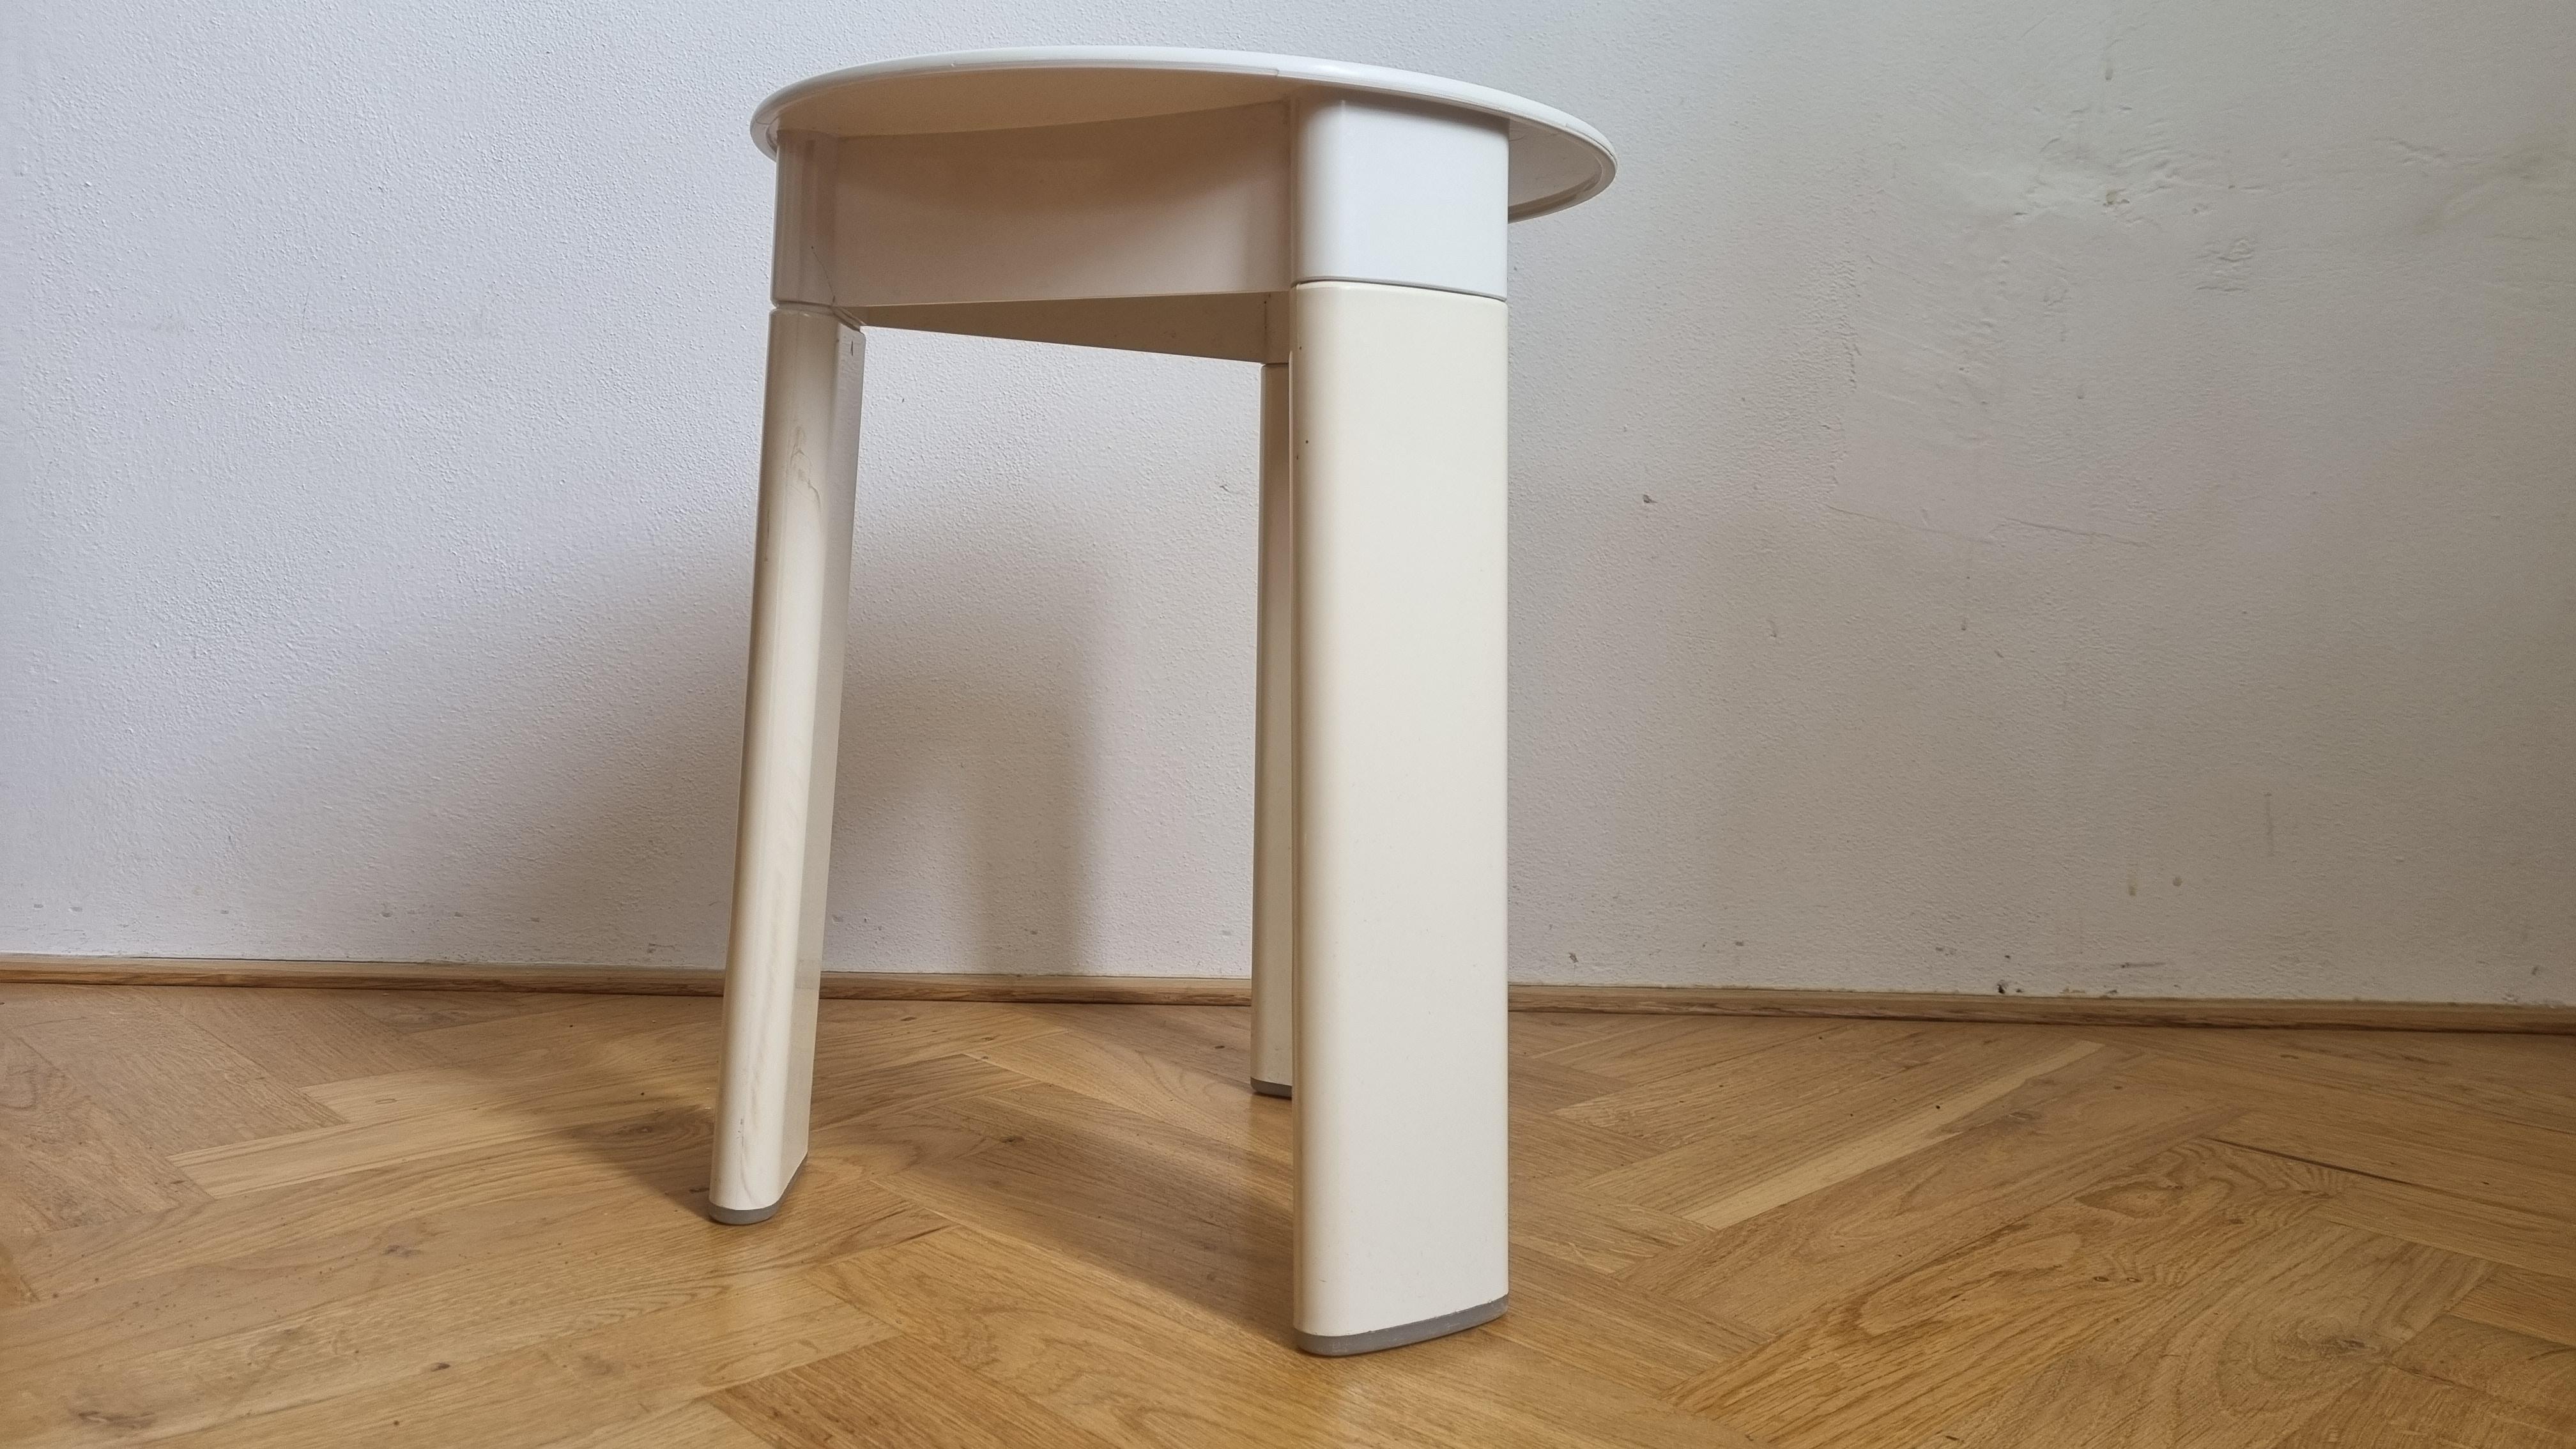 Midcentury Stool or Side Table Trio, Olaf Von Bohr for Gedy, Italy, 1970s For Sale 4